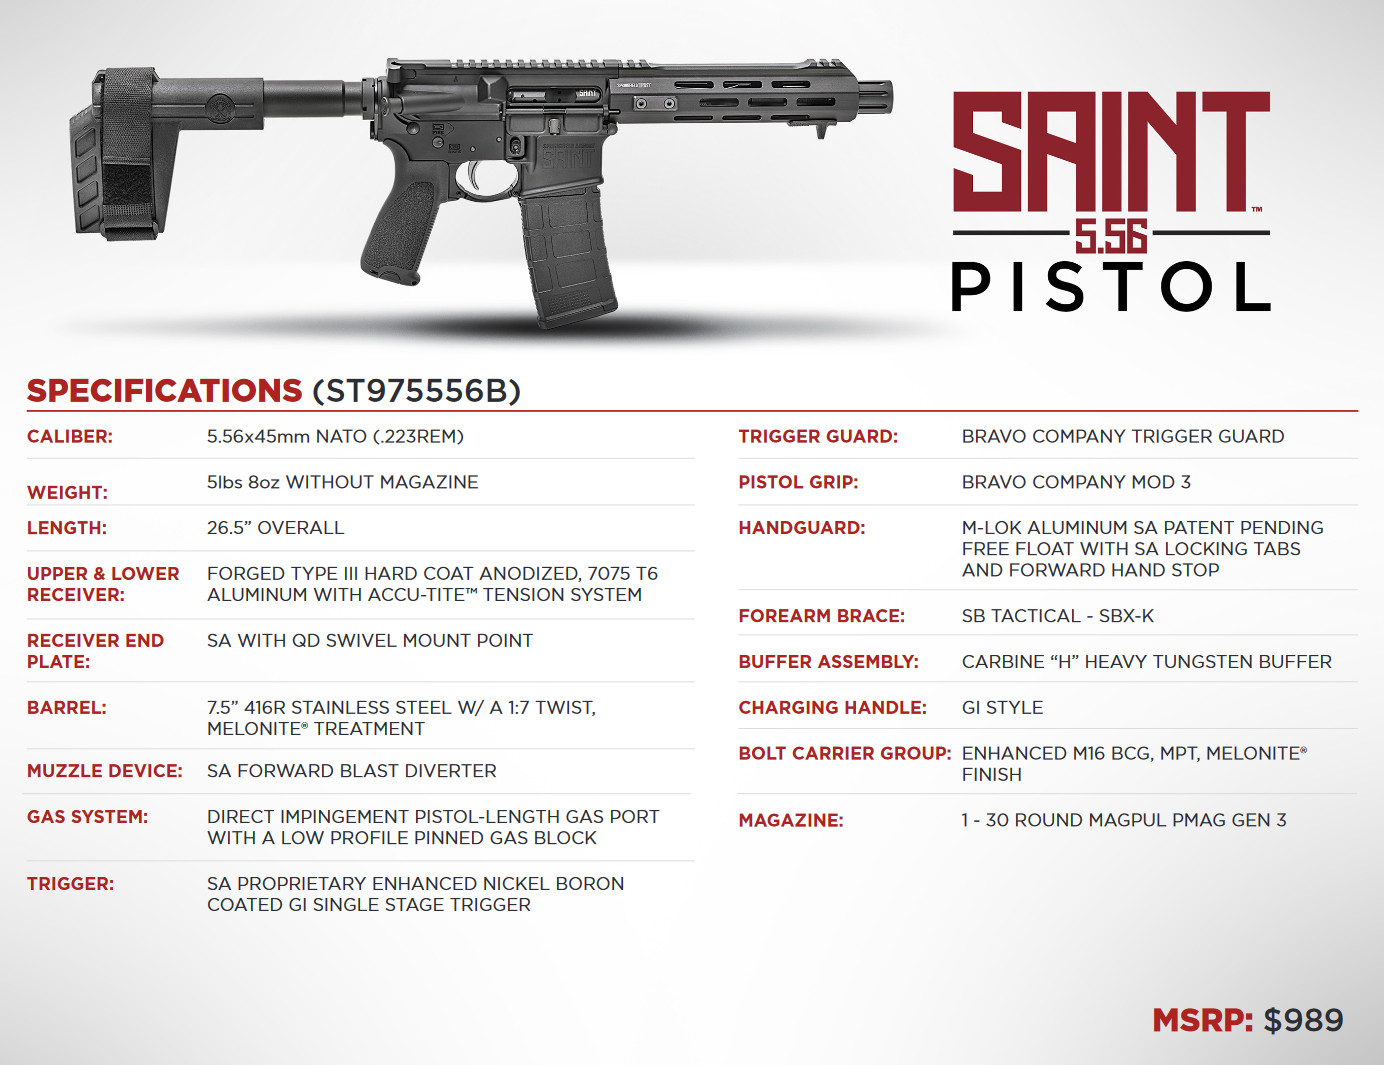 Springfield's Newest Saint is a Compact and Light Pistol